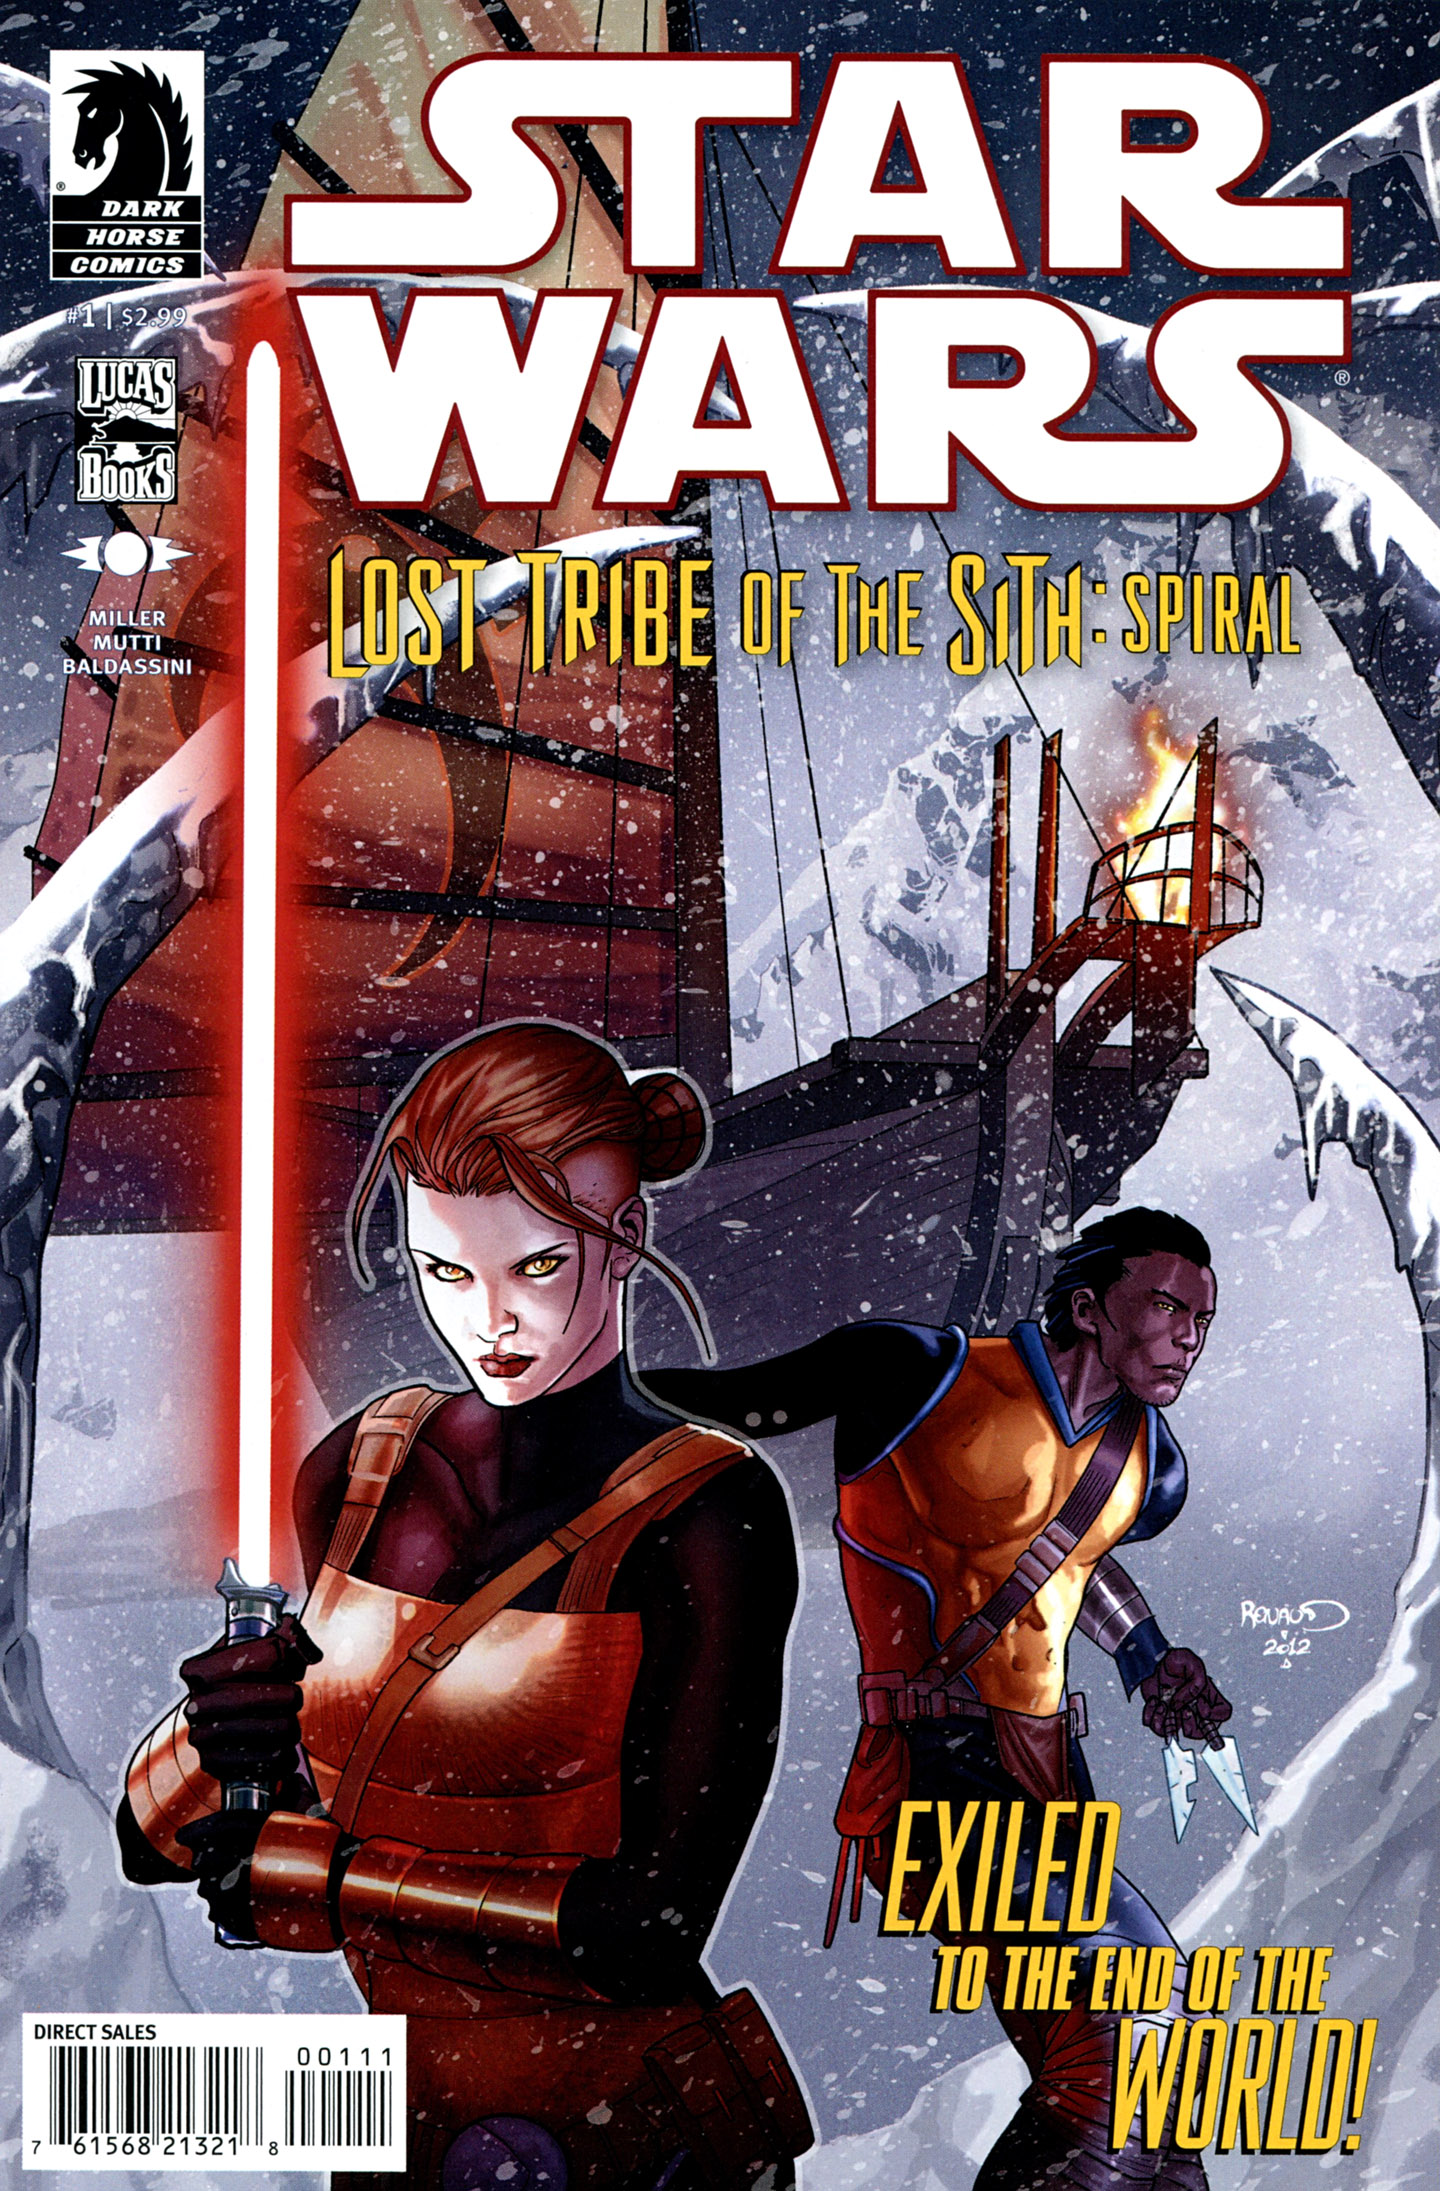 Read online Star Wars: Lost Tribe of the Sith - Spiral comic -  Issue #1 - 1